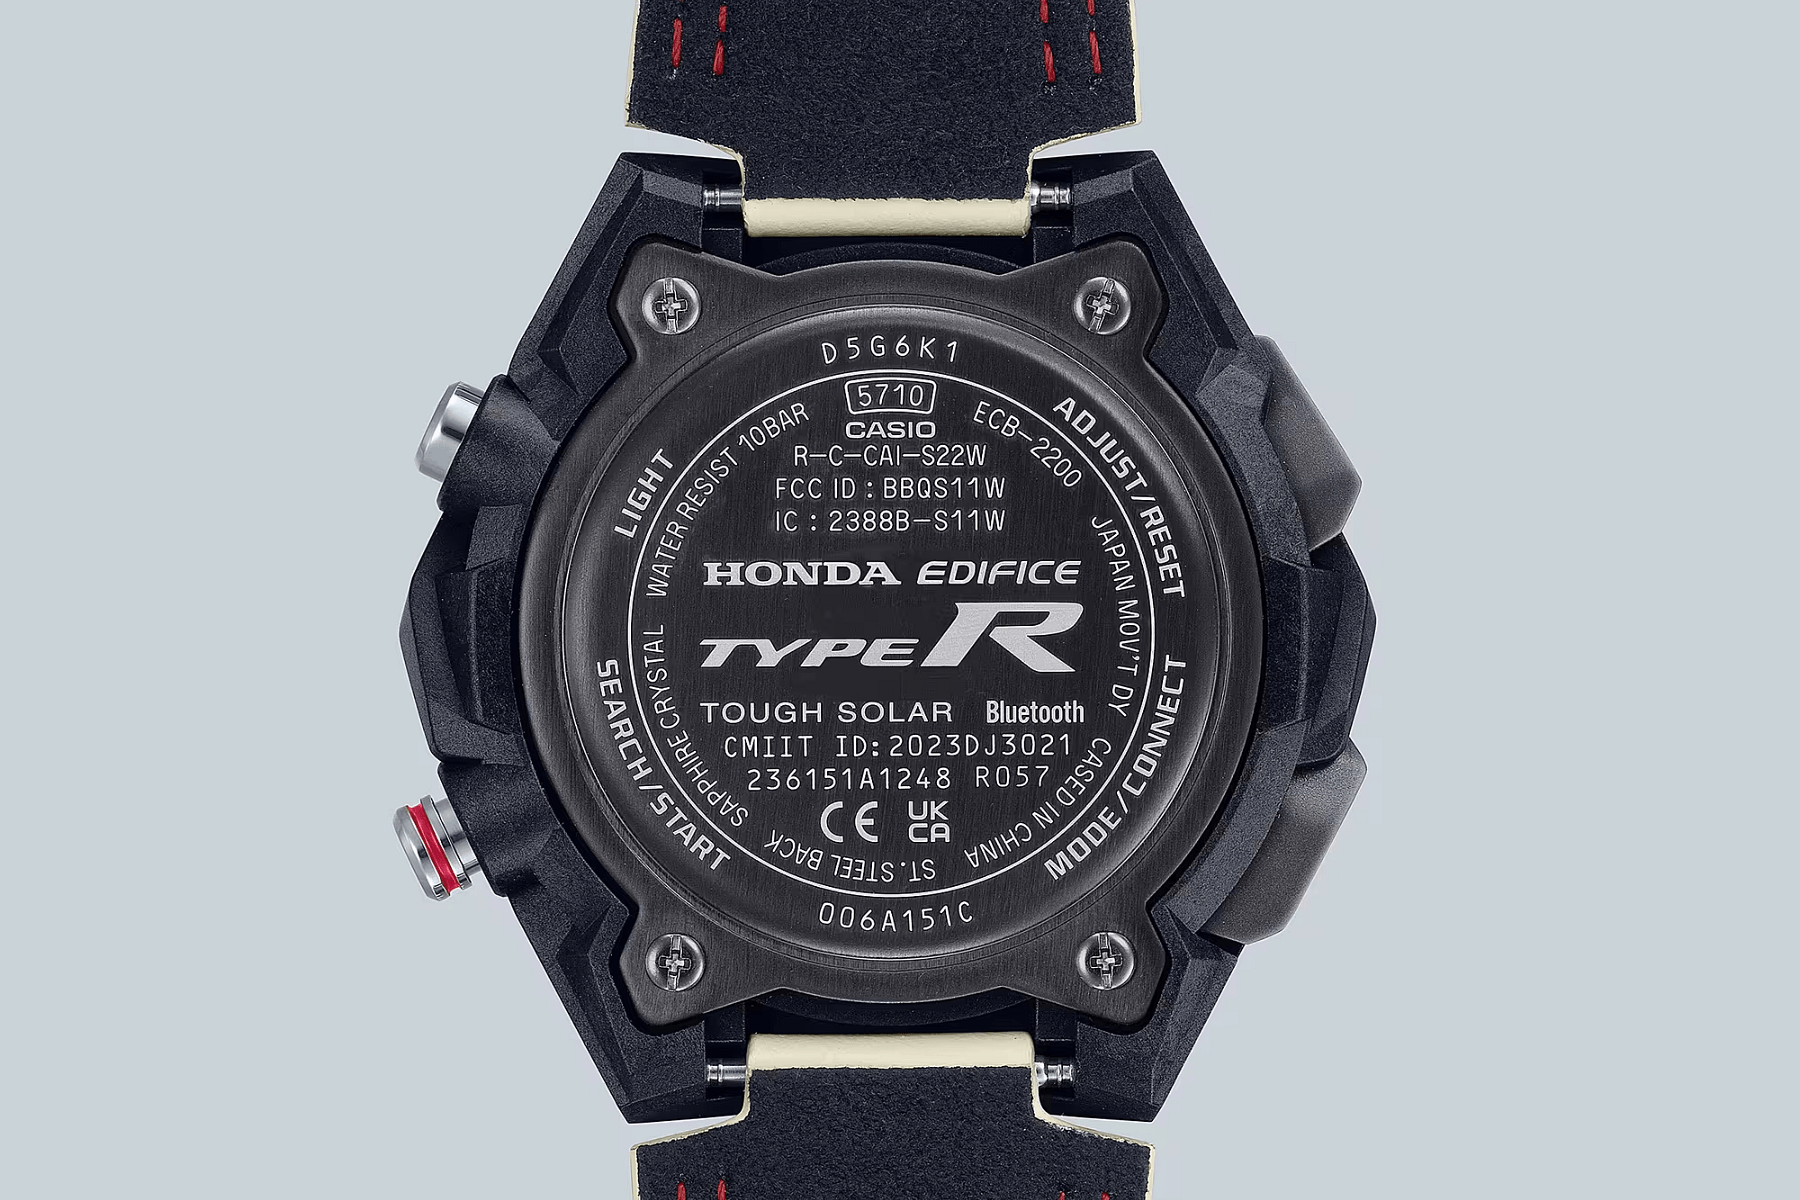 Casio Reveals Awesome New Edifice Watch Inspired By The Honda Type R